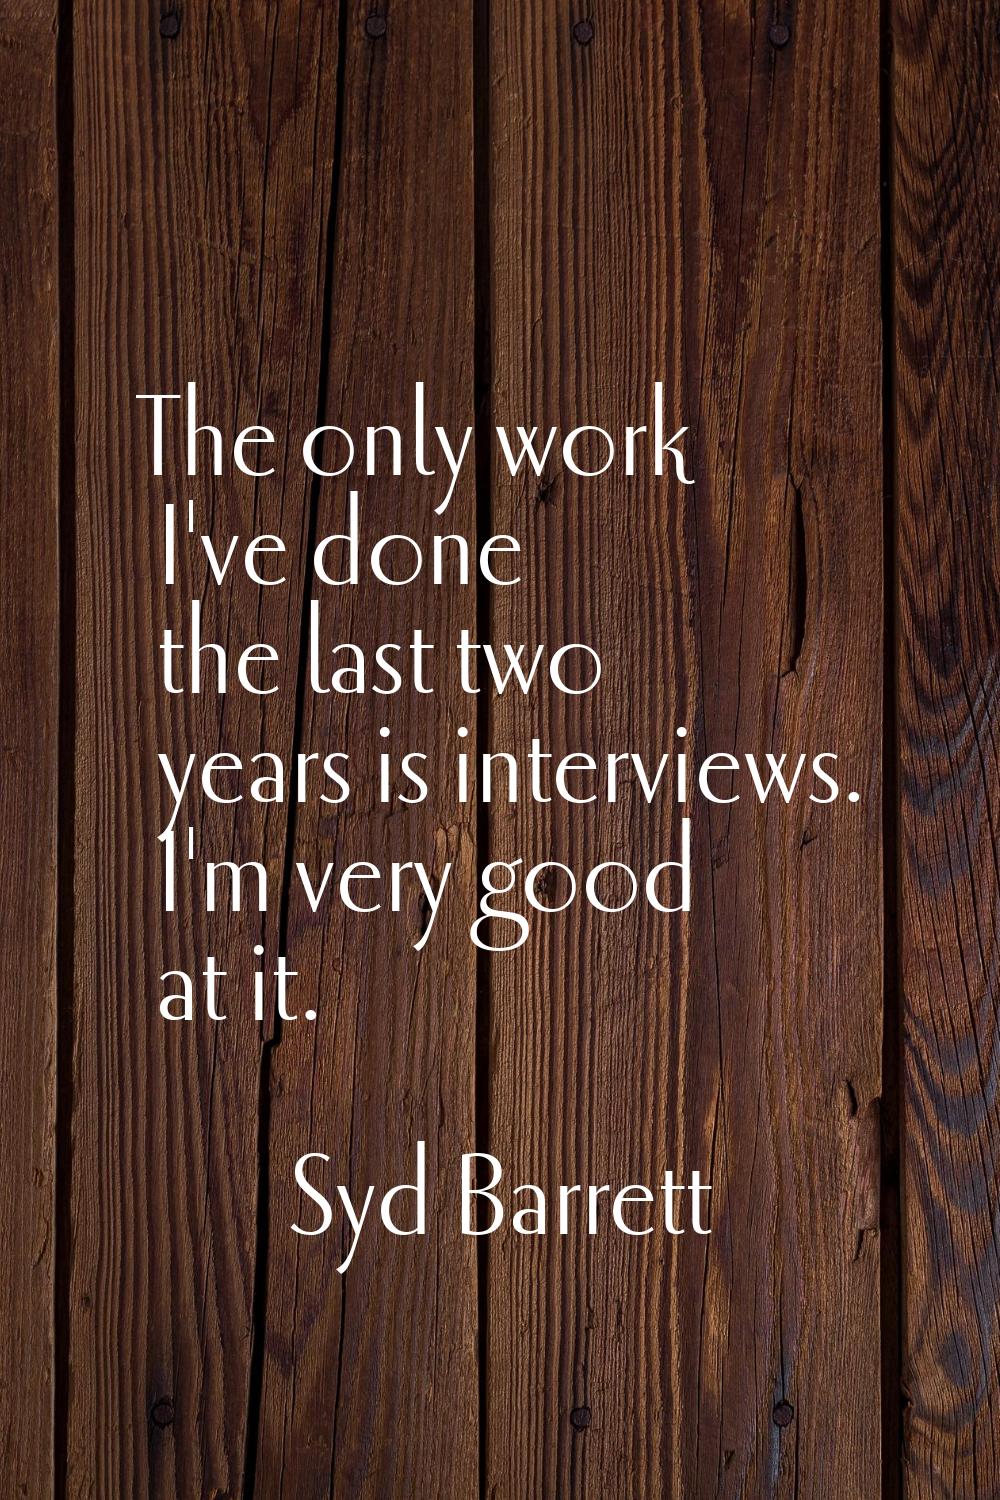 The only work I've done the last two years is interviews. I'm very good at it.